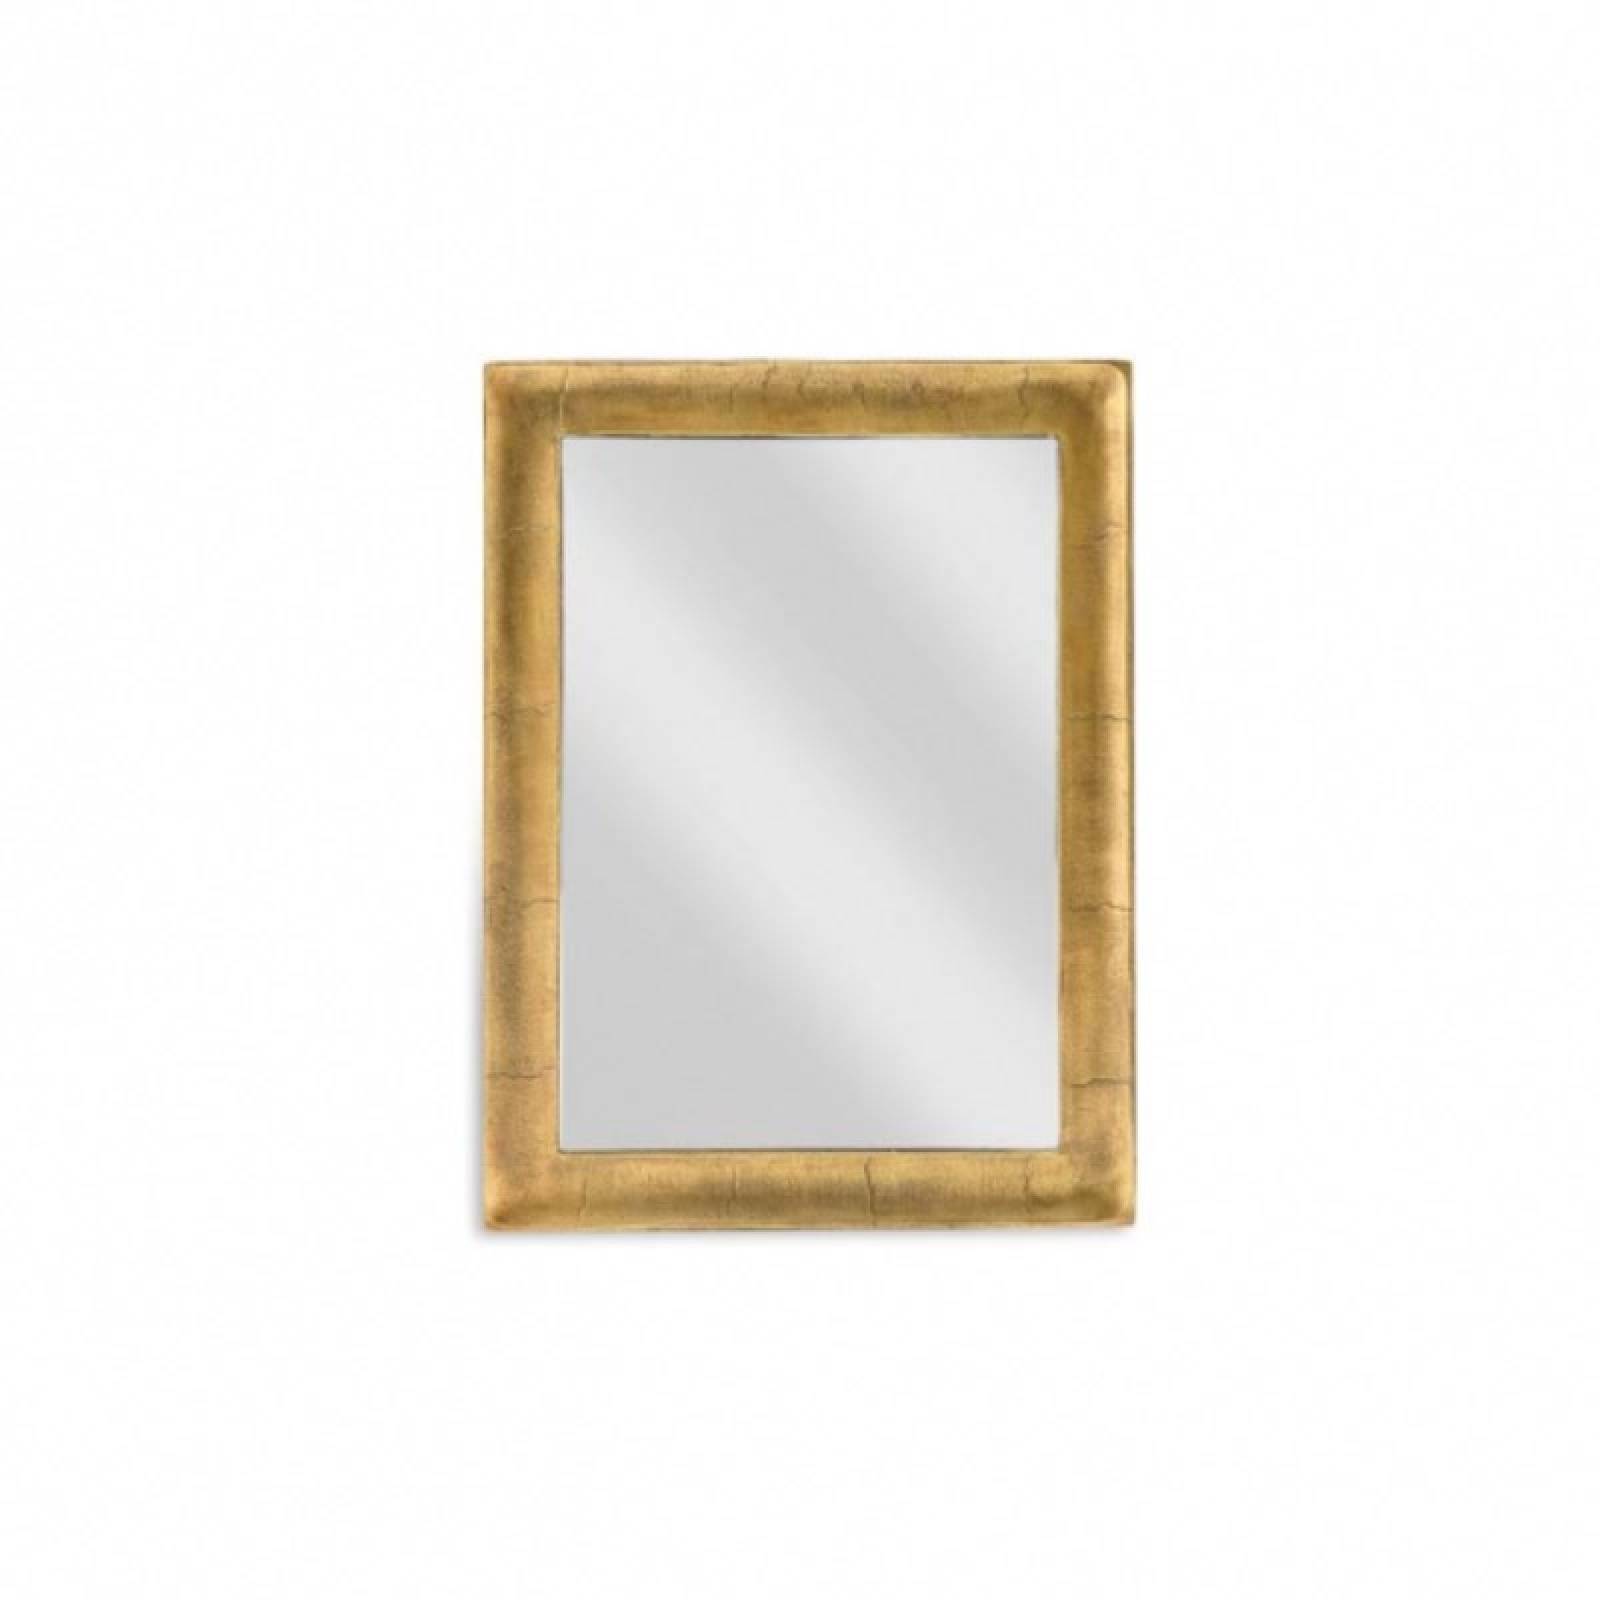 Rectangular Mirror With Curved Antiqued Frame 61x45cm thumbnails